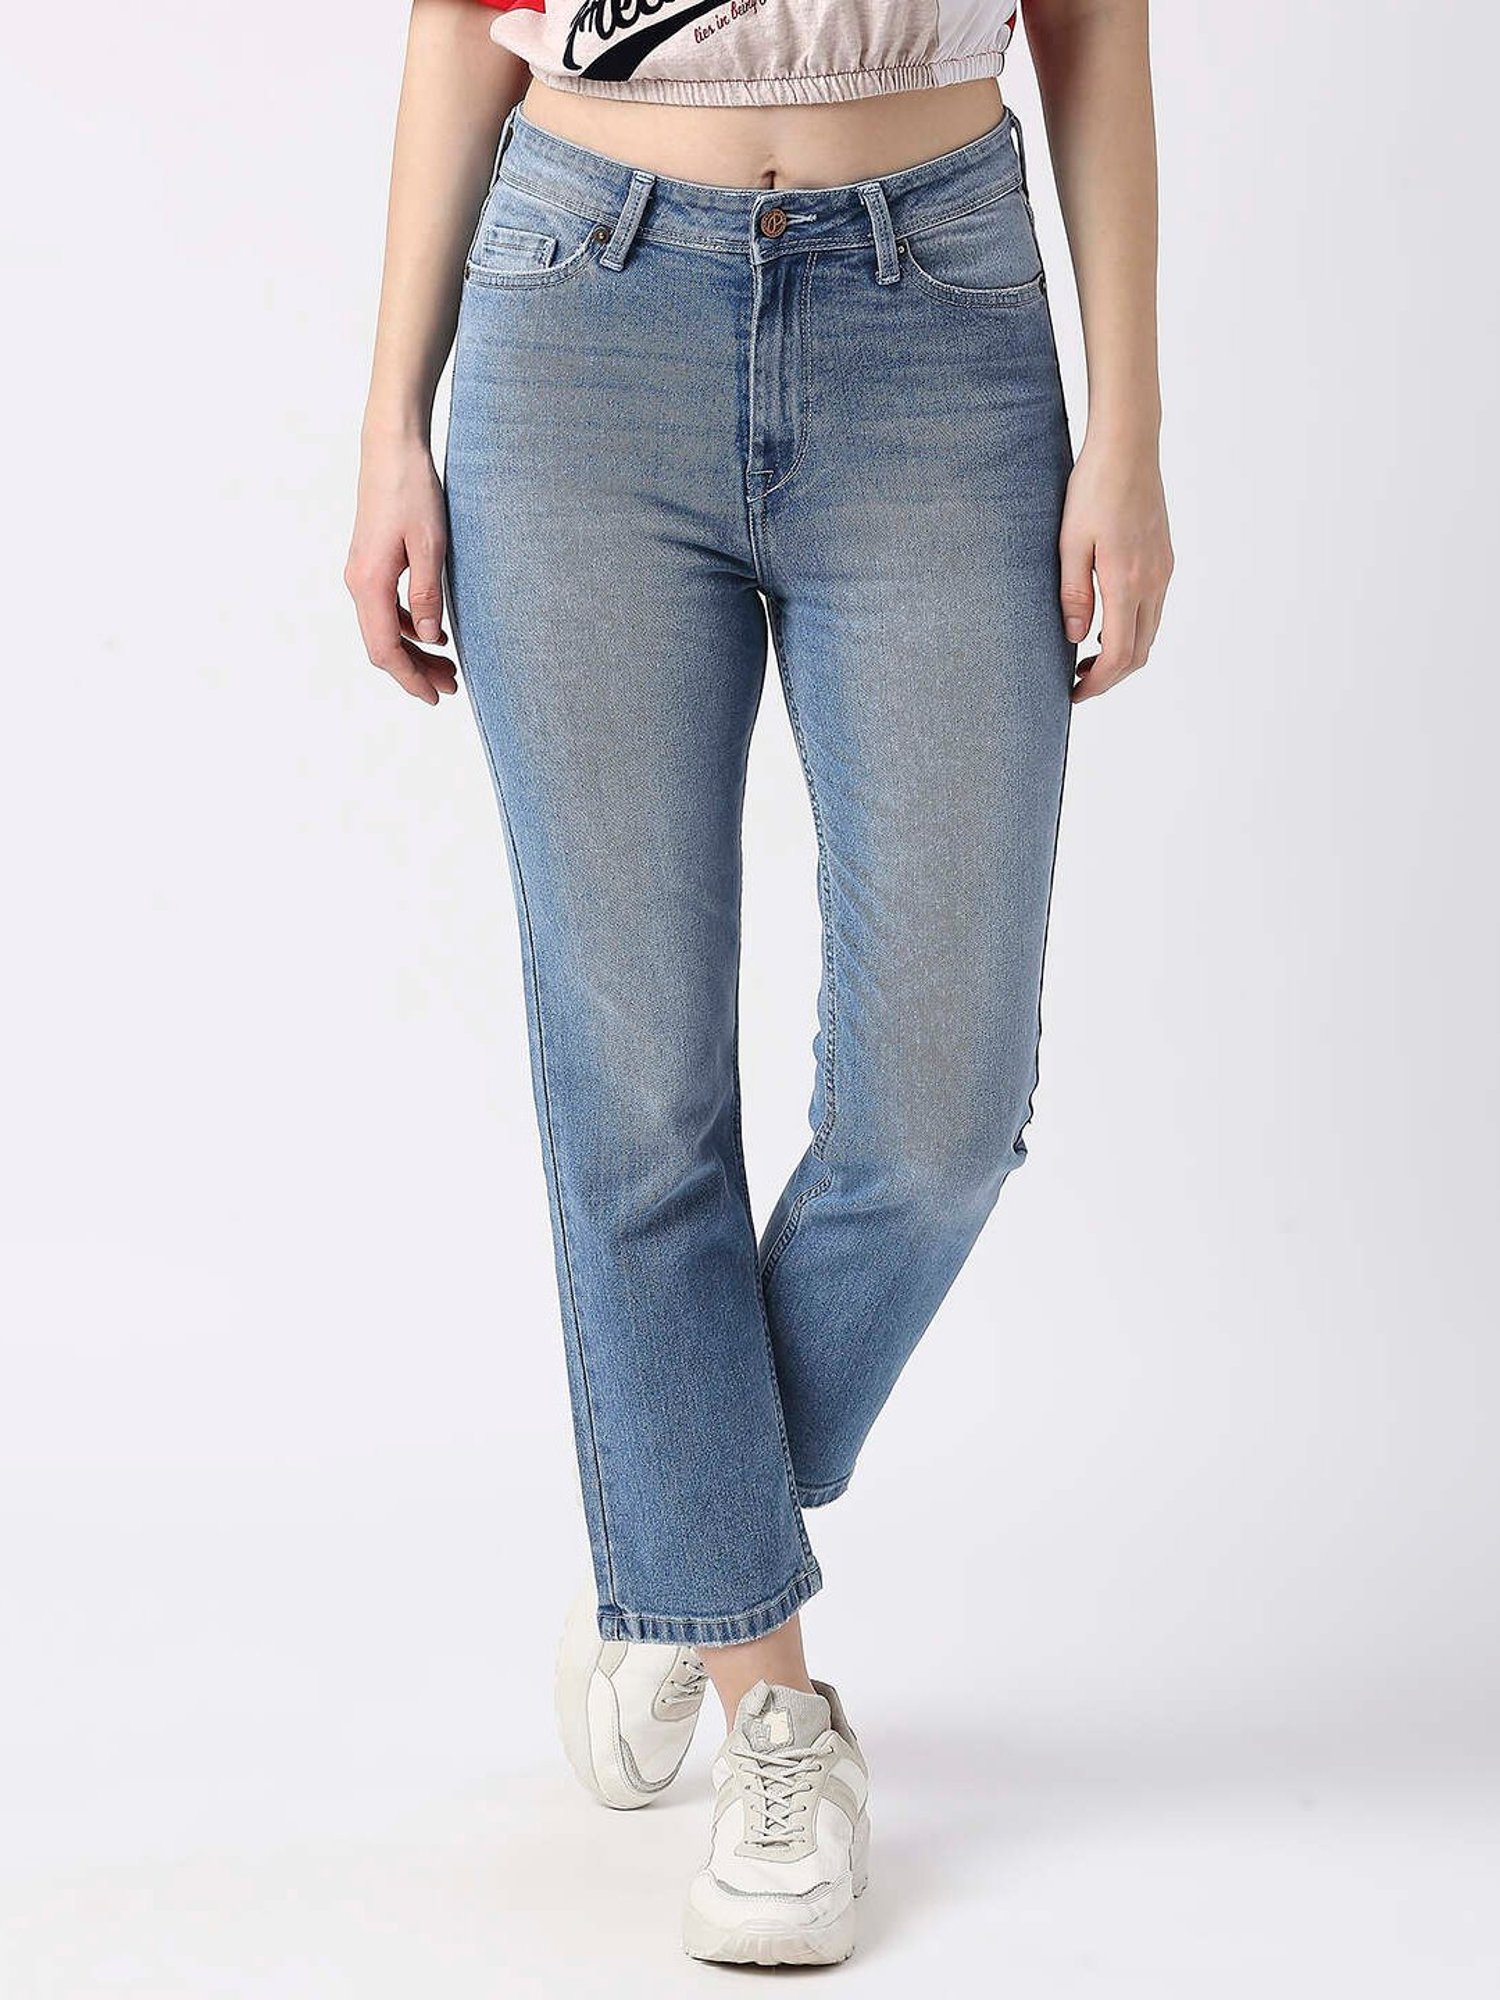 Update more than 93 high waist straight fit jeans best